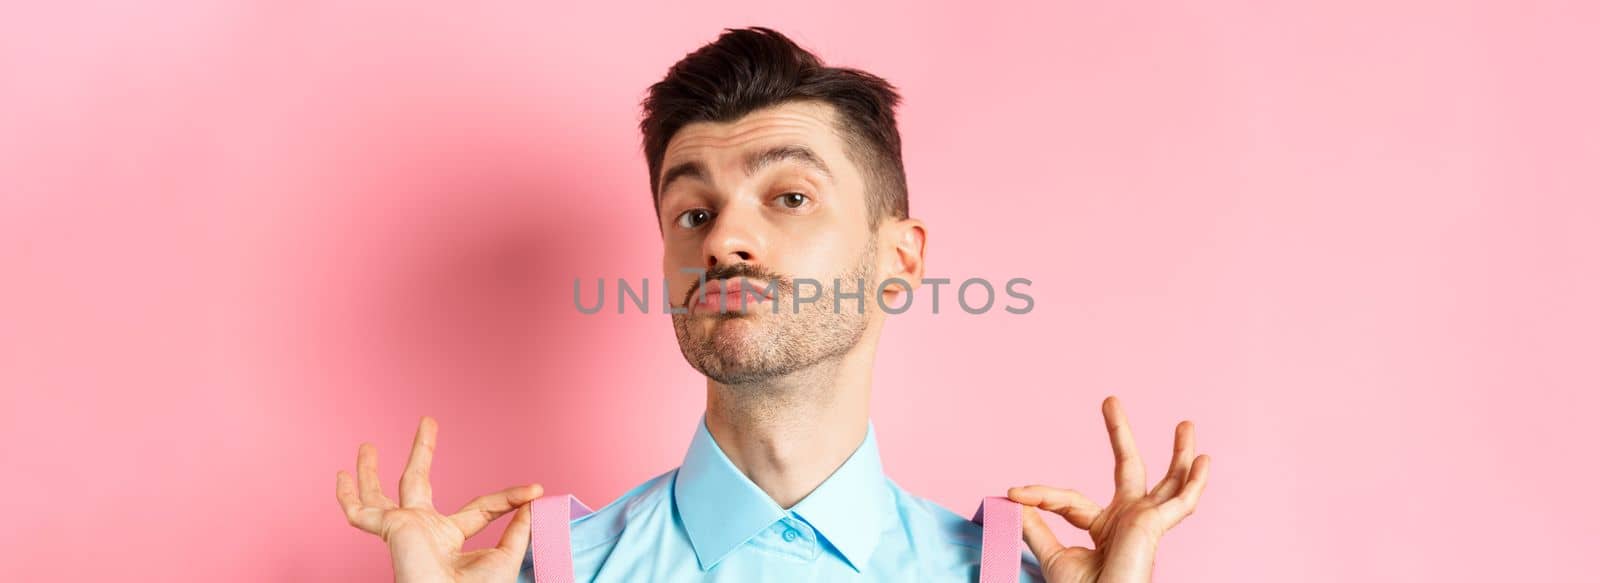 Close up of classy handsome guy adjusting suspenders, pucker lips and raise chin up, looking confident, standing in trendy outfit on pink background.